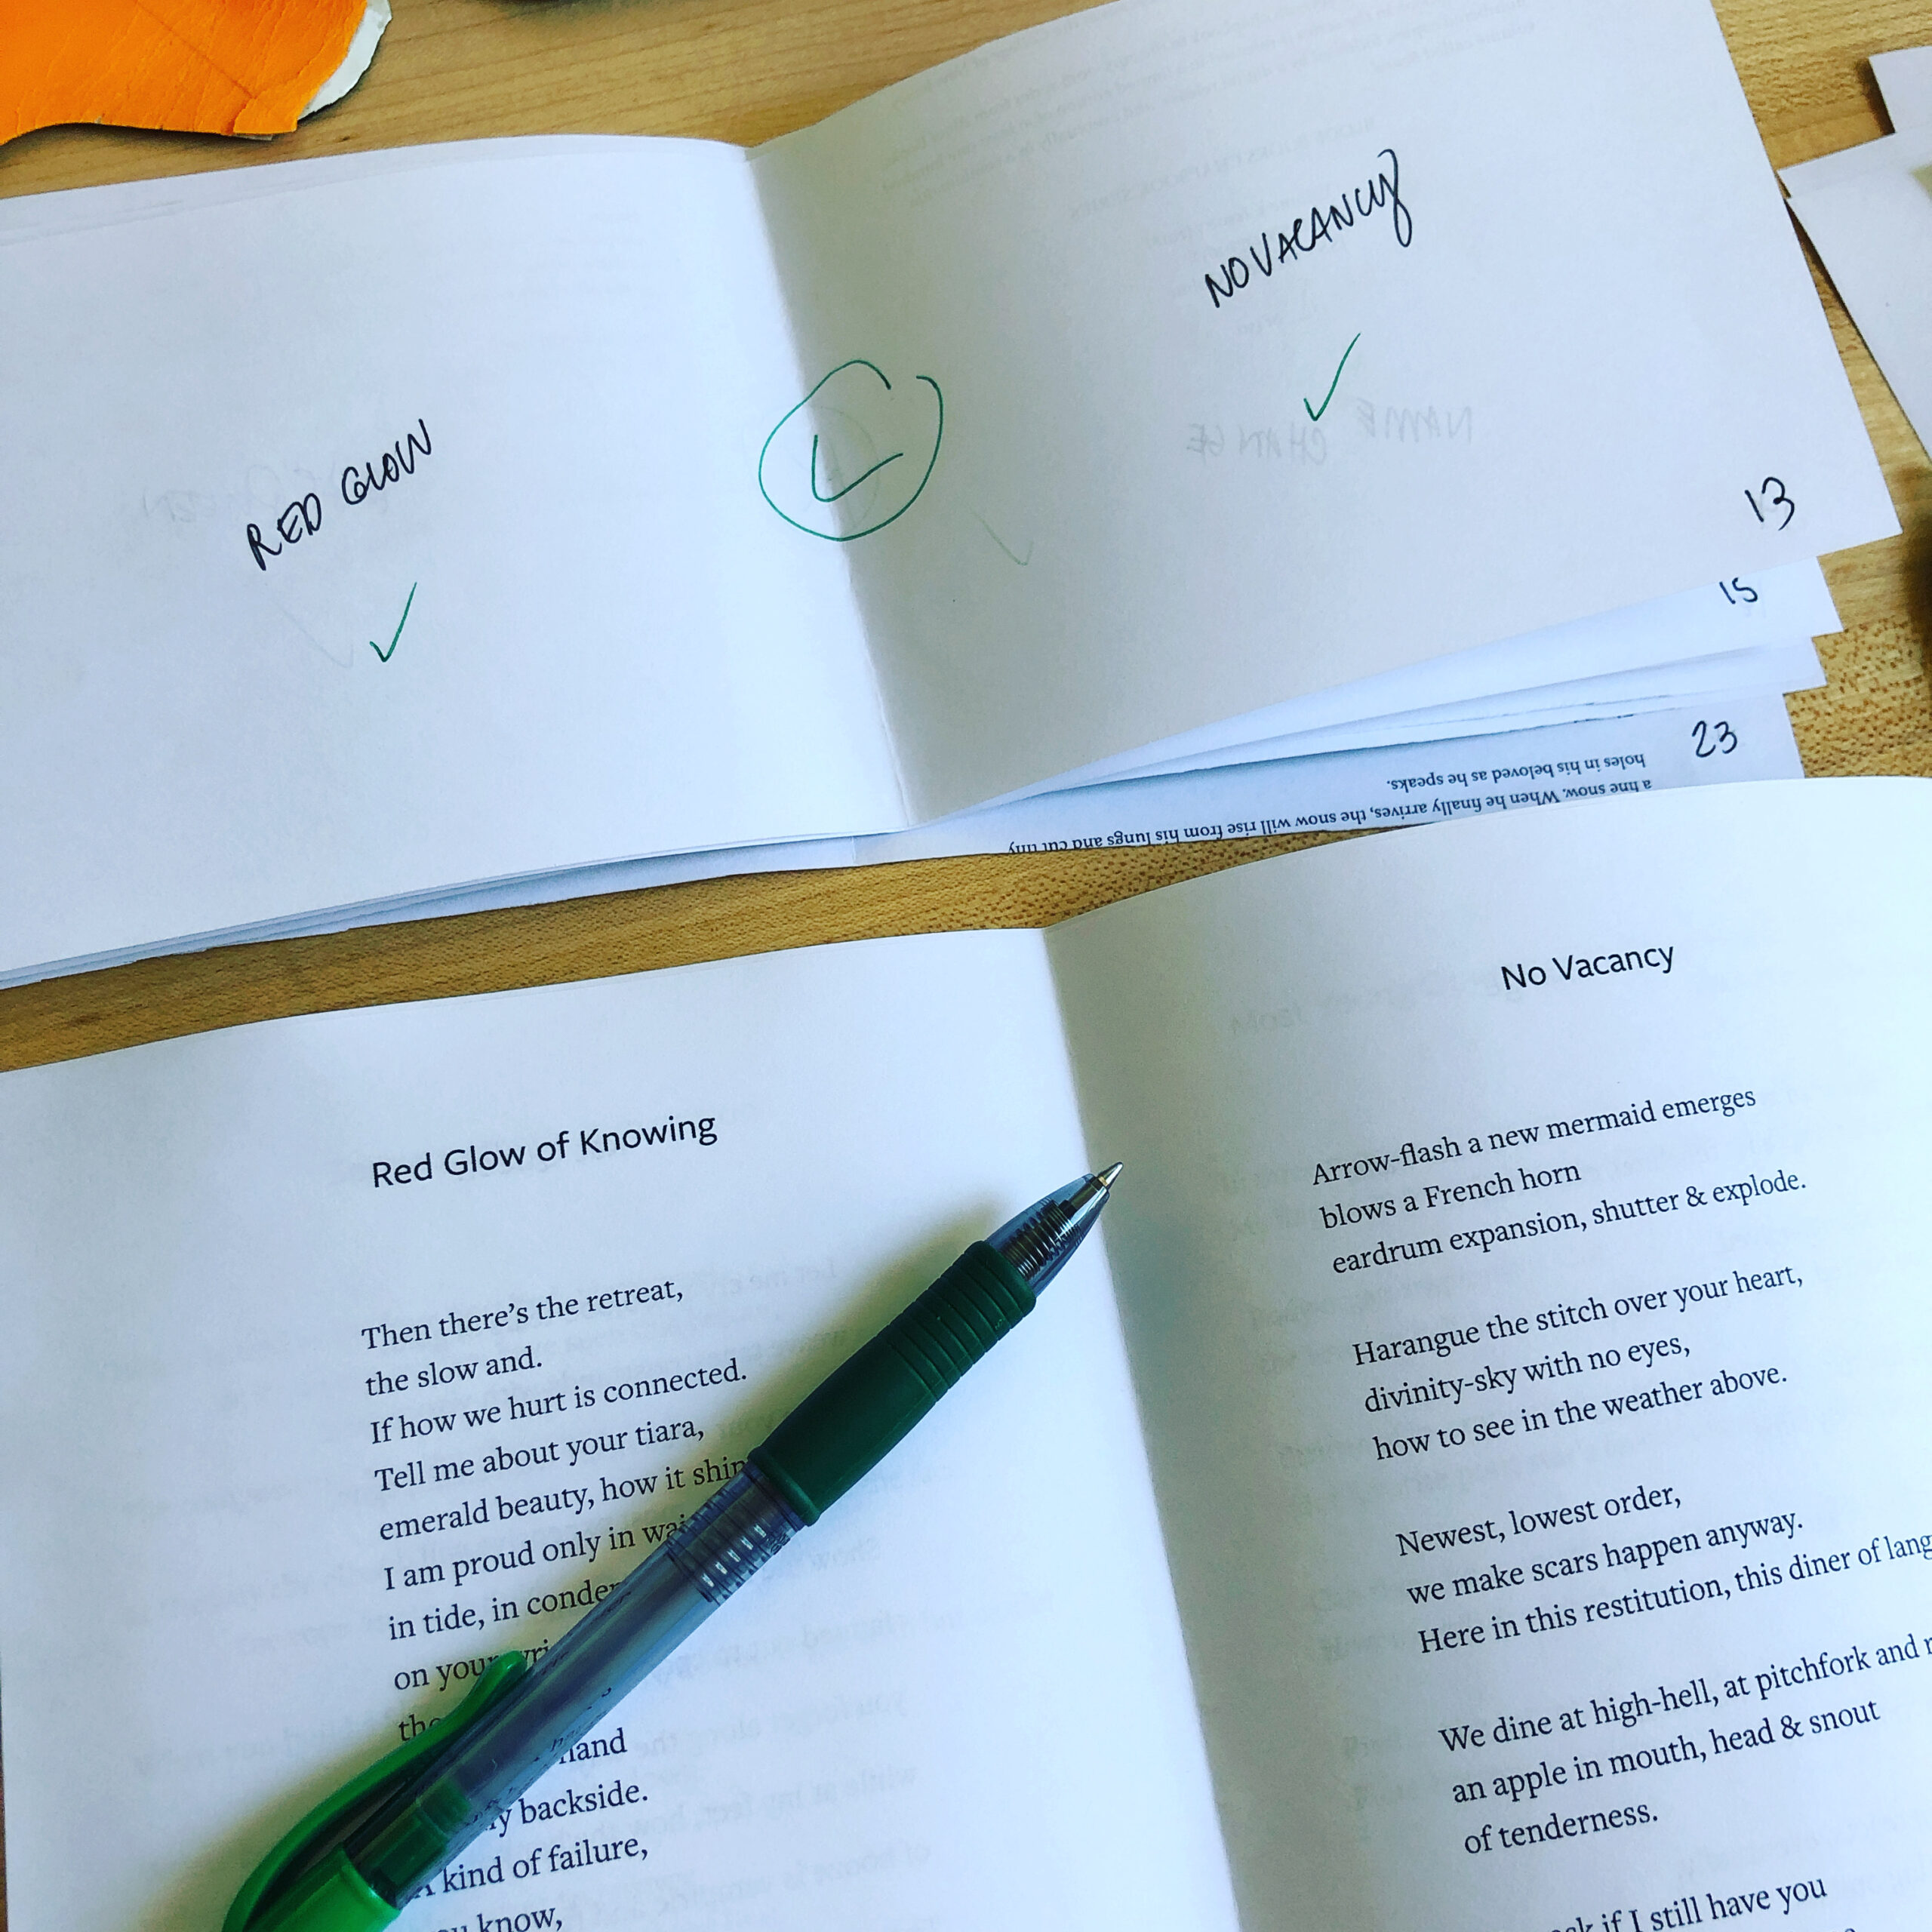 Printed proof of Rat Queen by Katie Jean Shinkle with small hand-marked mockbook showing imposition notes. The book's two central poems can be partially seen: "Red Glow of Knowing" on the left page and "No Vacancy" on the right.